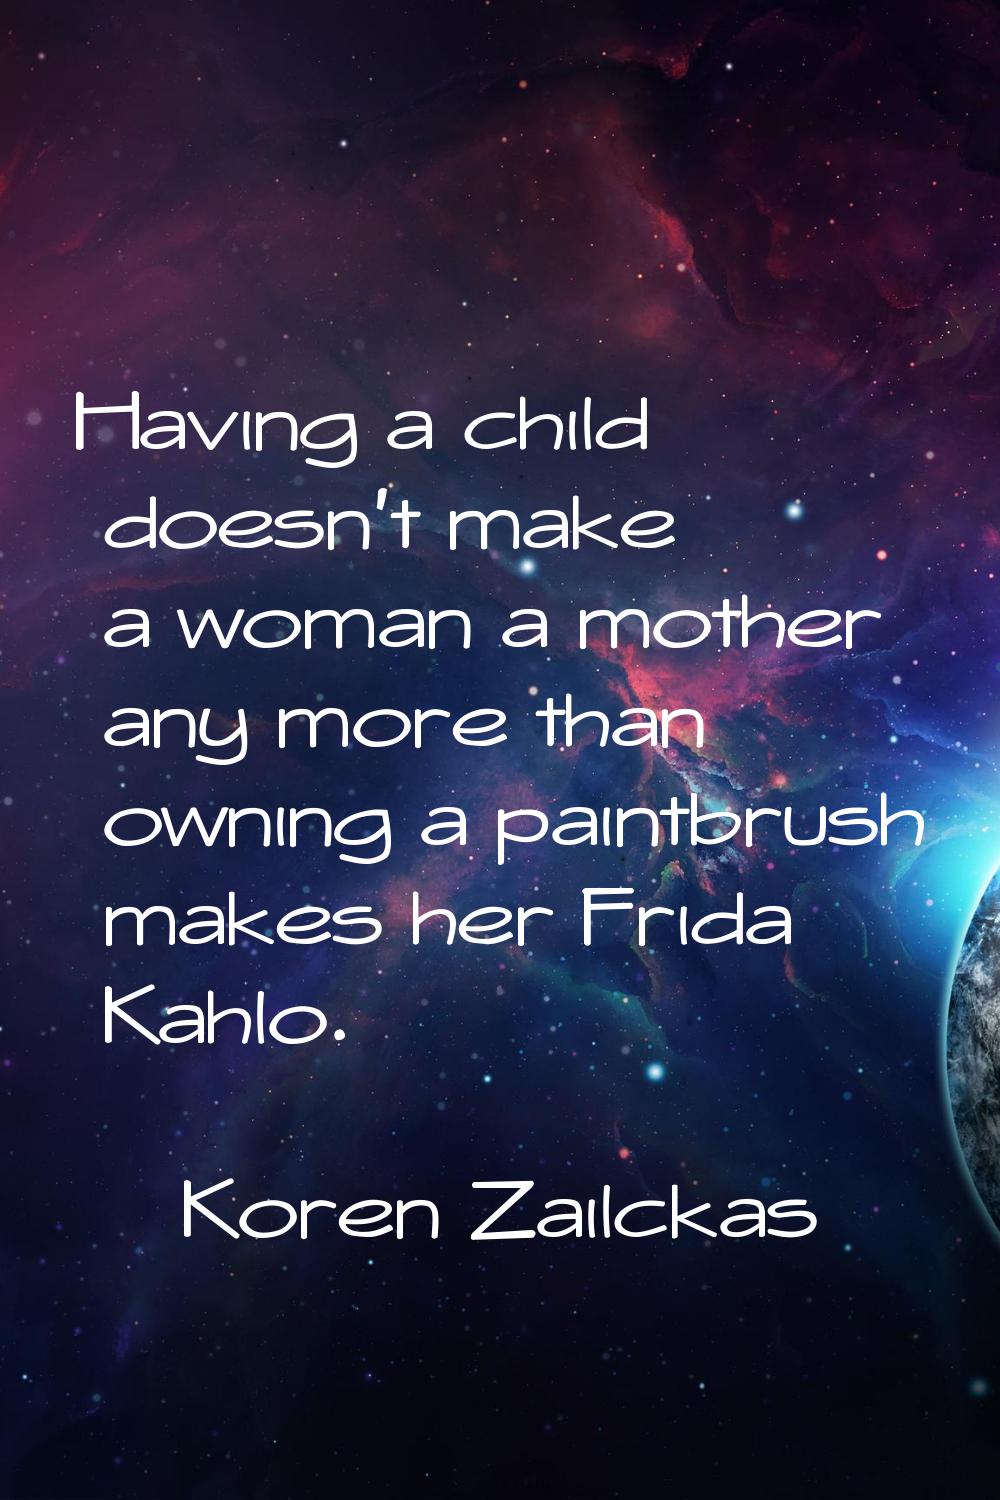 Having a child doesn't make a woman a mother any more than owning a paintbrush makes her Frida Kahl